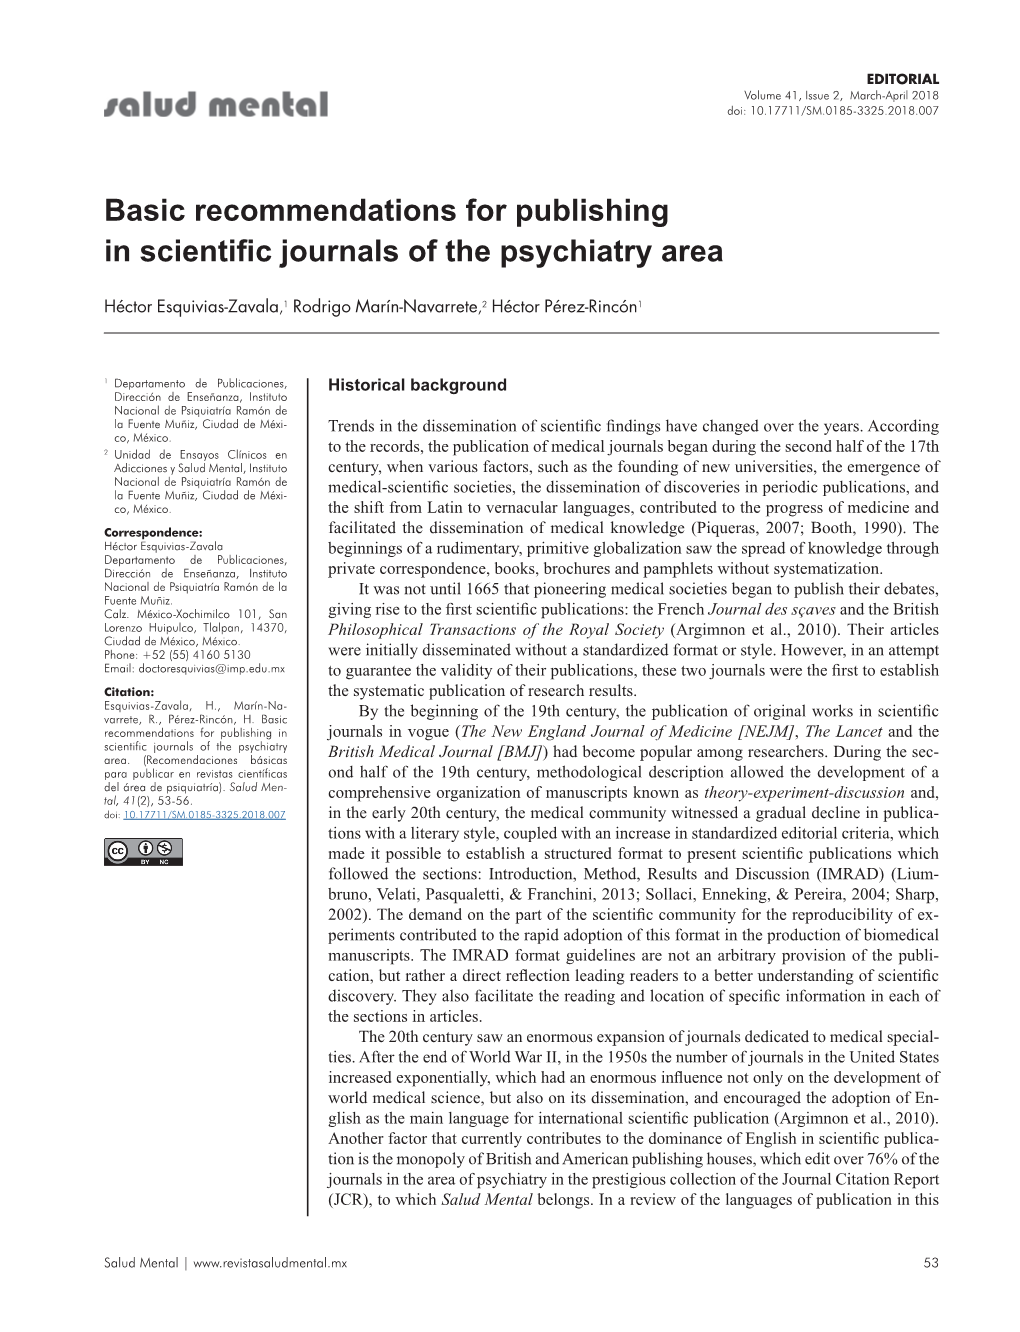 Basic Recommendations for Publishing in Scientific Journals of the Psychiatry Area